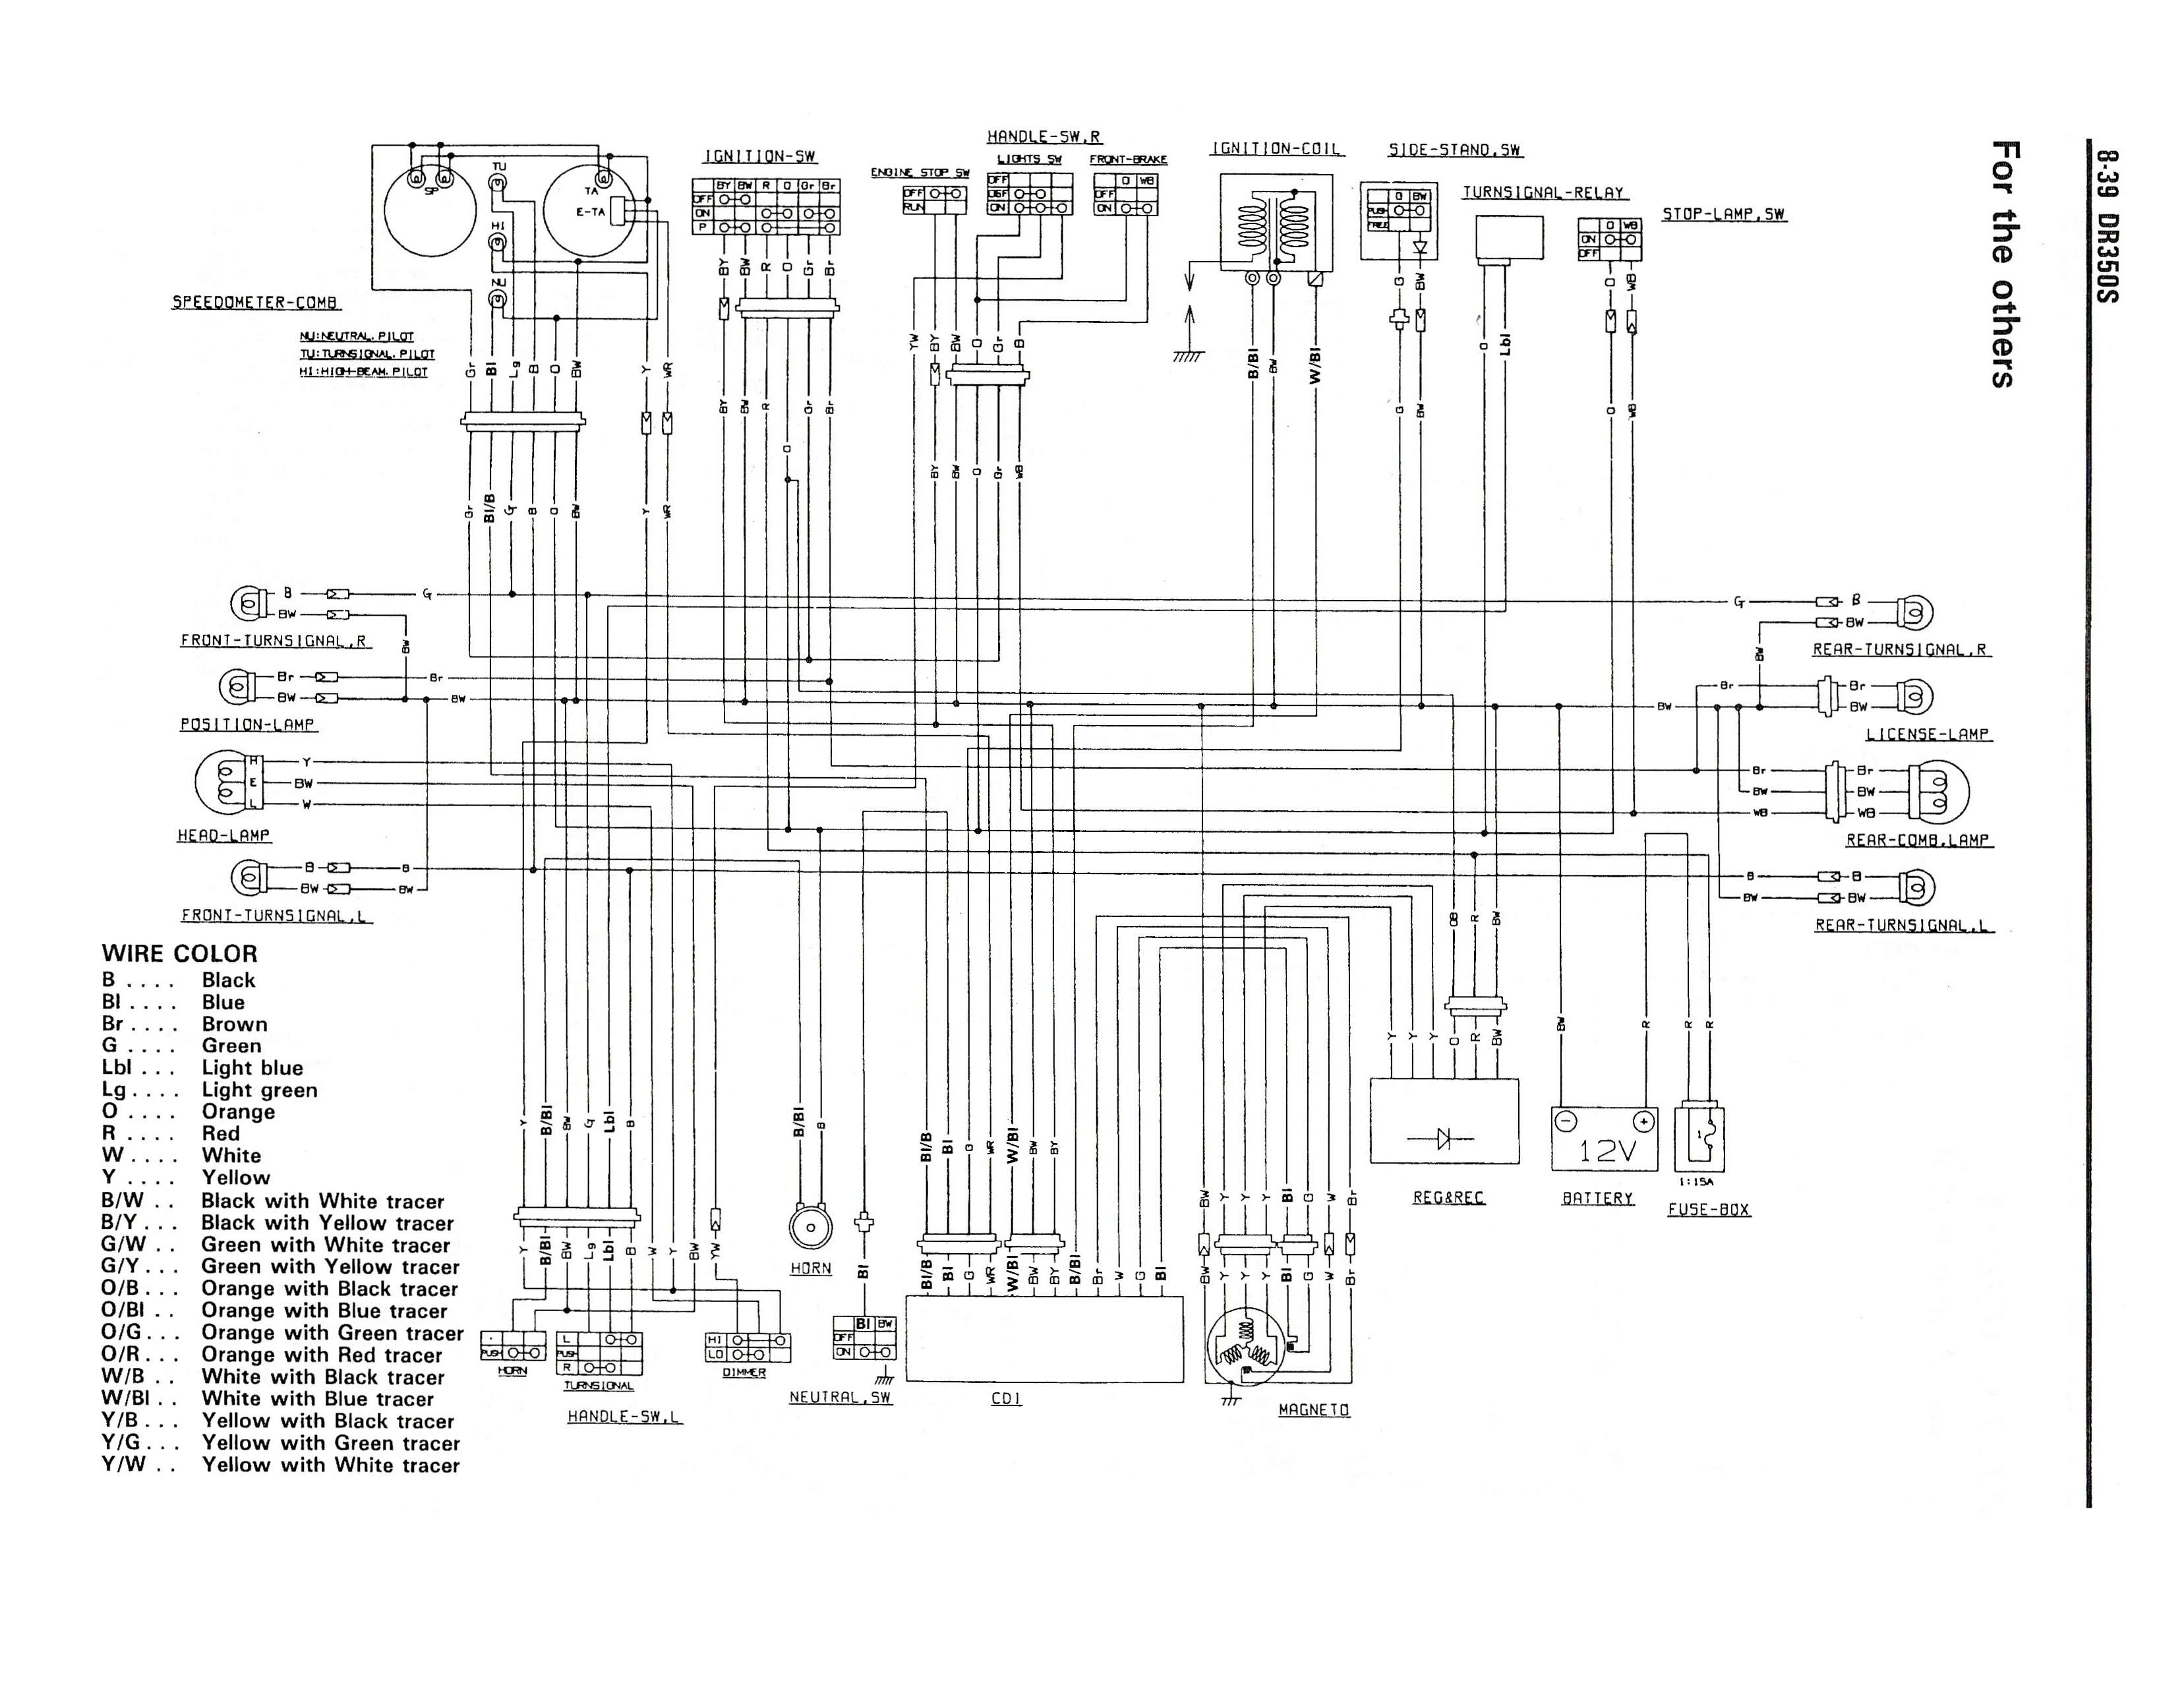 Wiring diagram for the DR350 S (1990 and later models - Other countries)